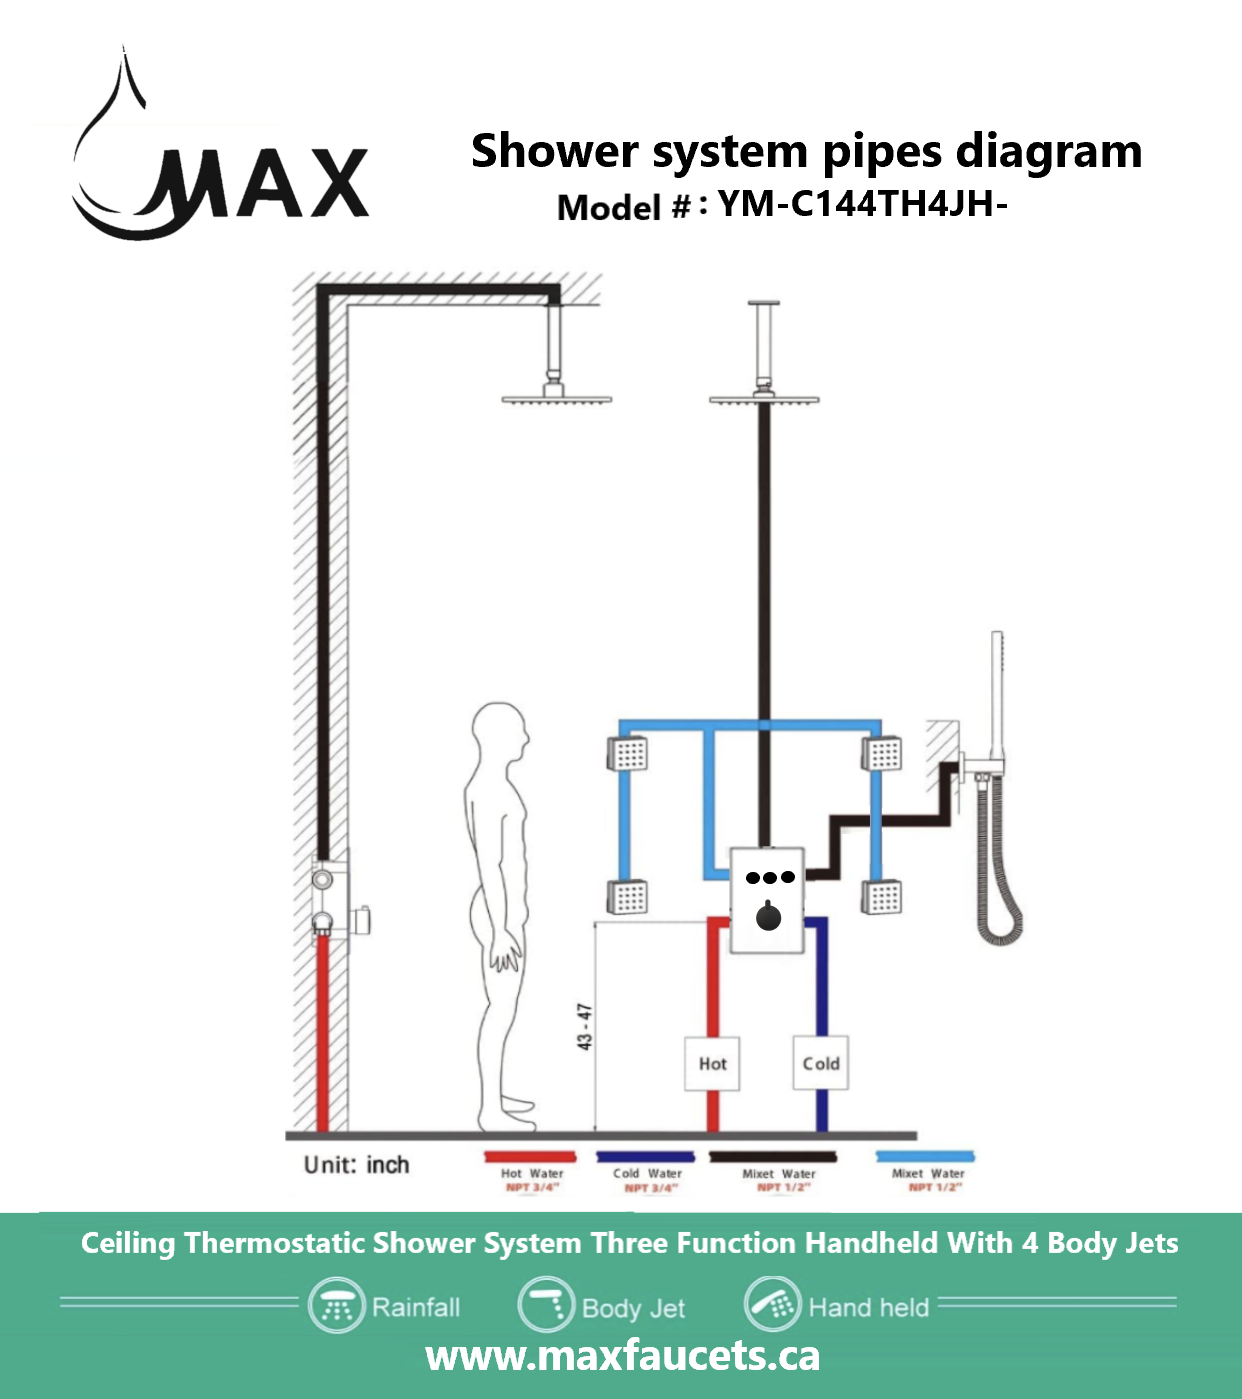 Ceiling Thermostatic Shower System Three Function Handheld With 4 Body Jets and Valve